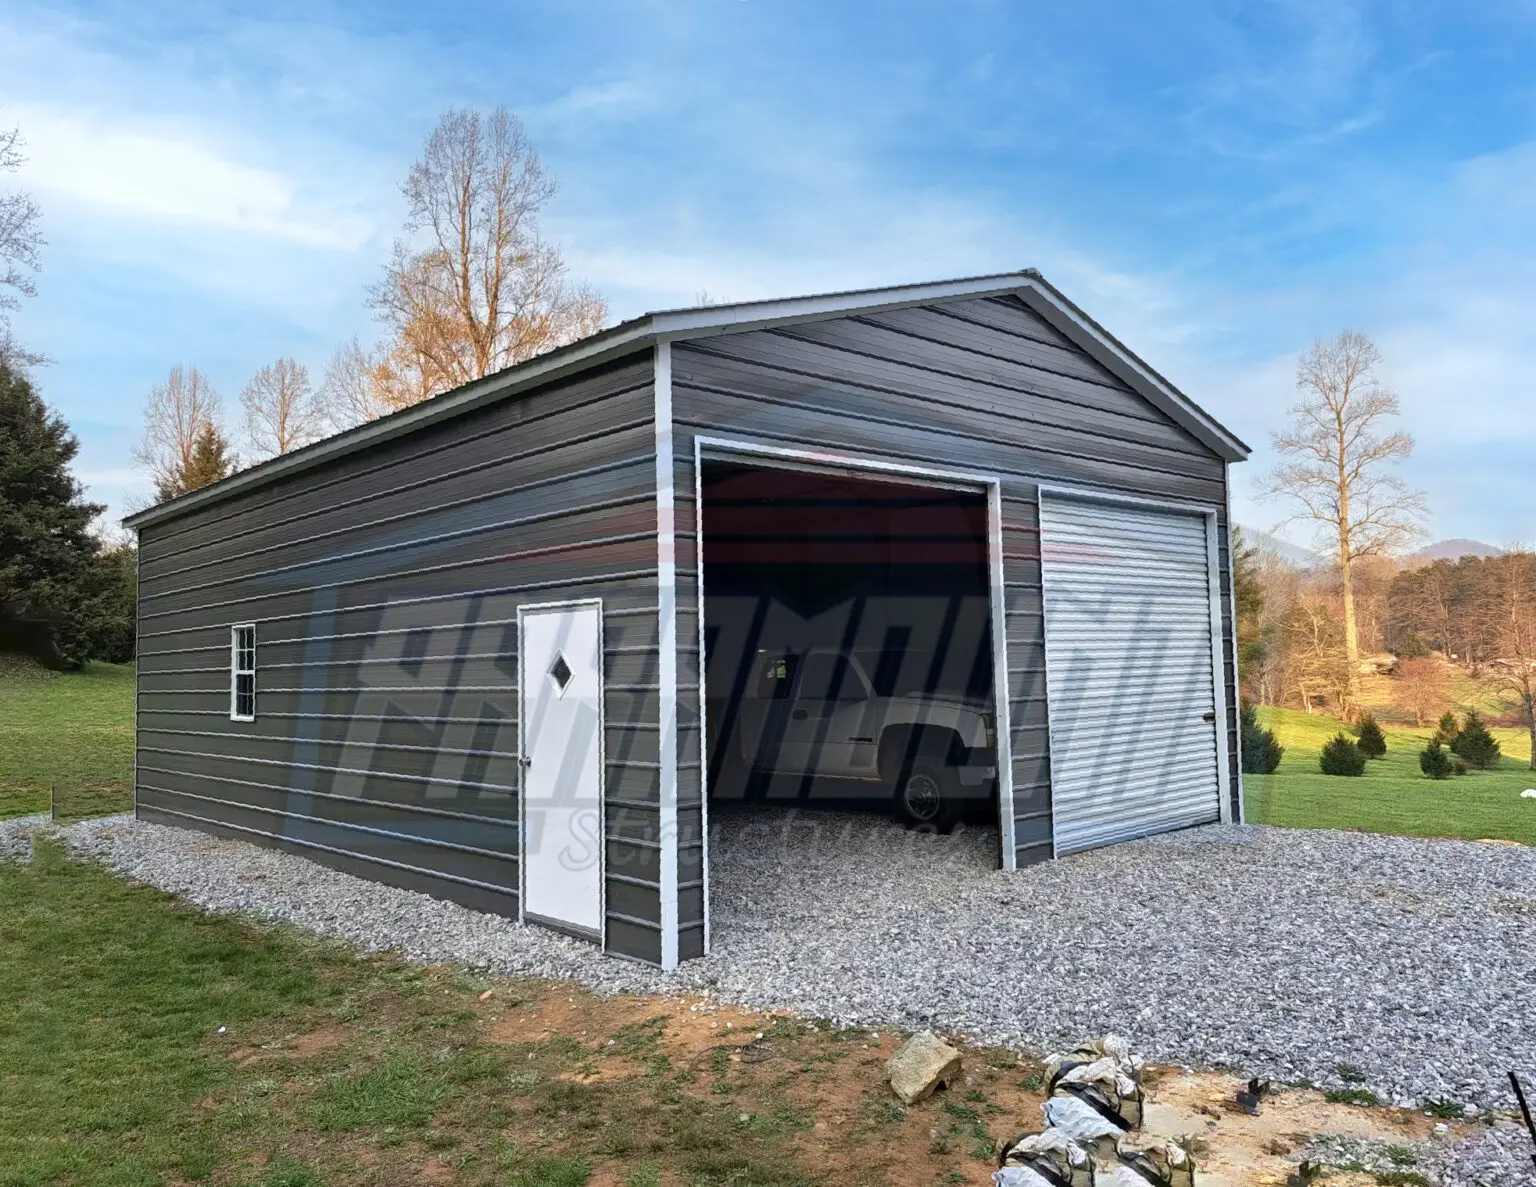 A garage with two doors and a door that has been opened.